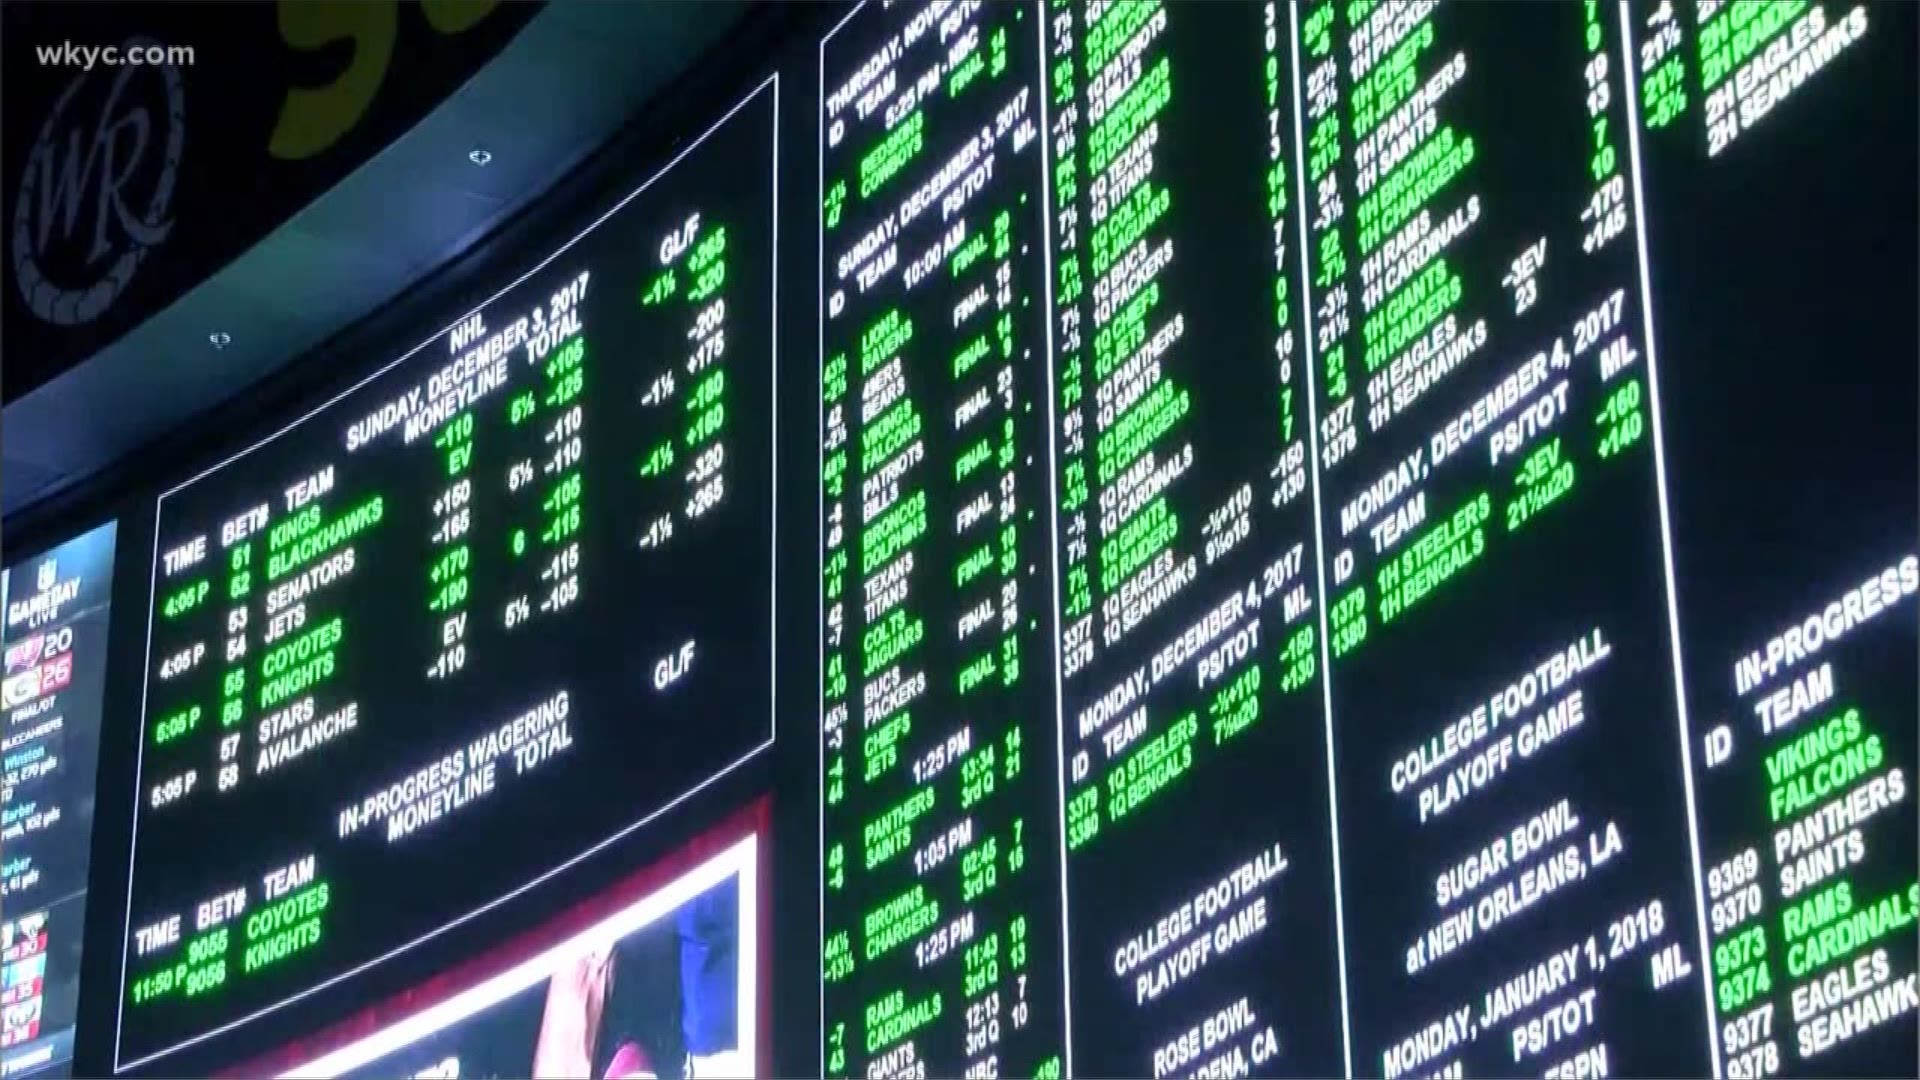 Bill introduced to legalize sports gambling in Ohio